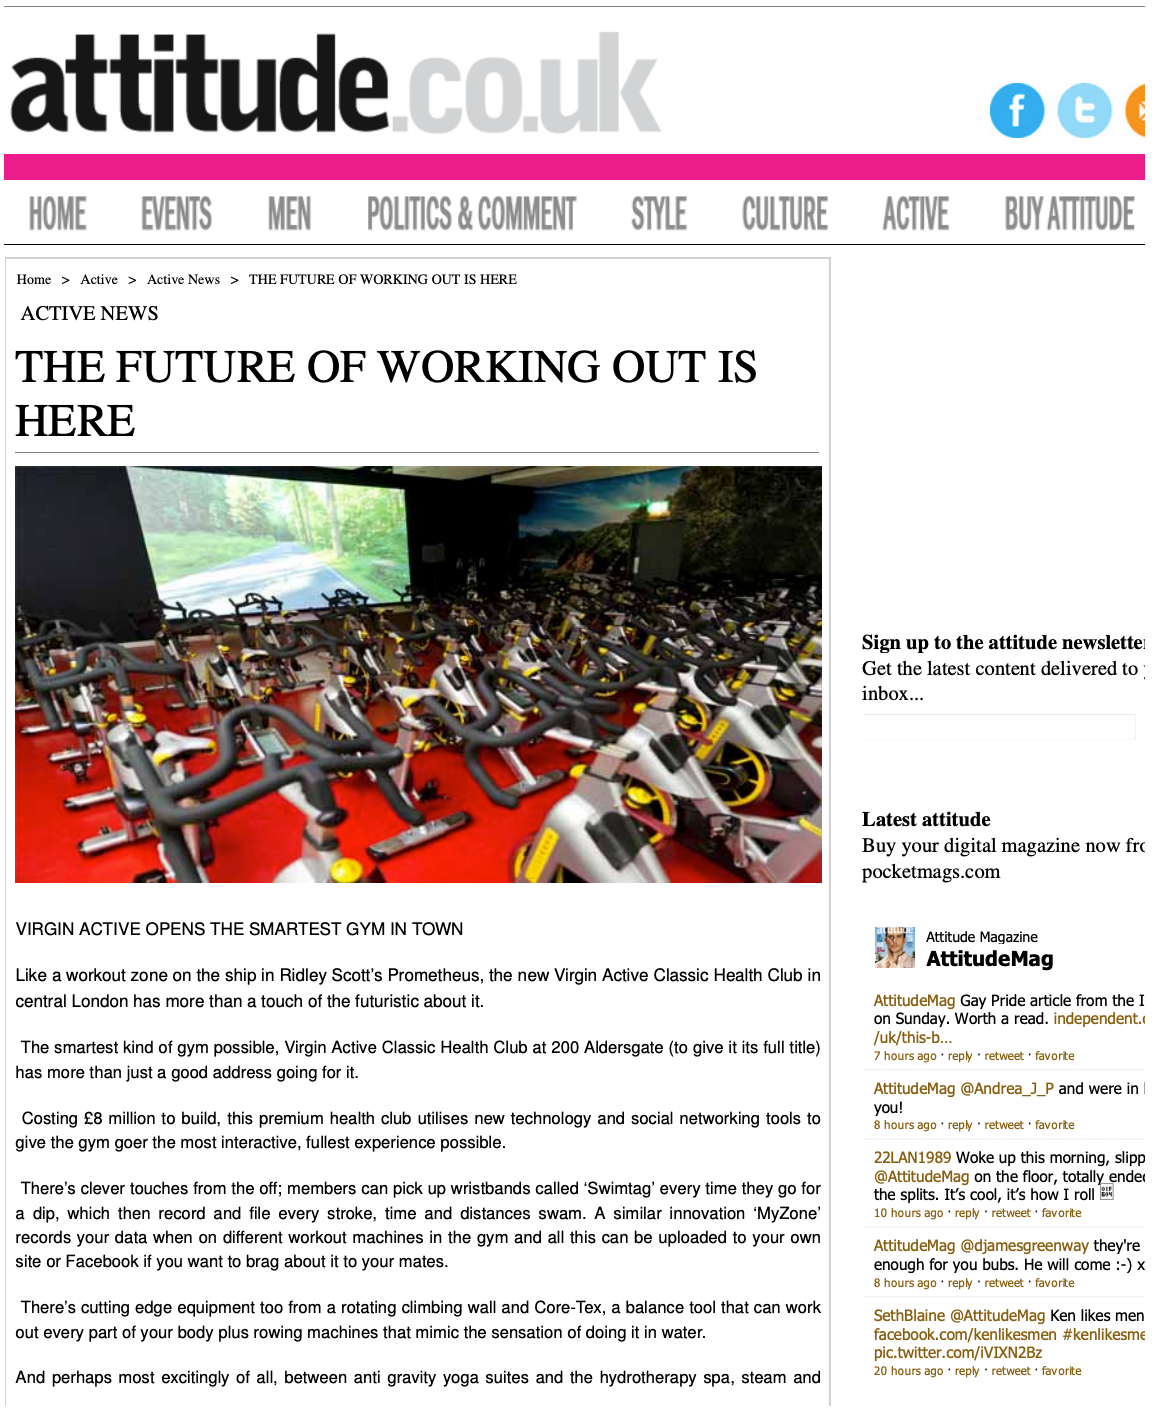 ALTITUDE MAGAZINE UK, JUNE 2012: The Future of Working Out is Here